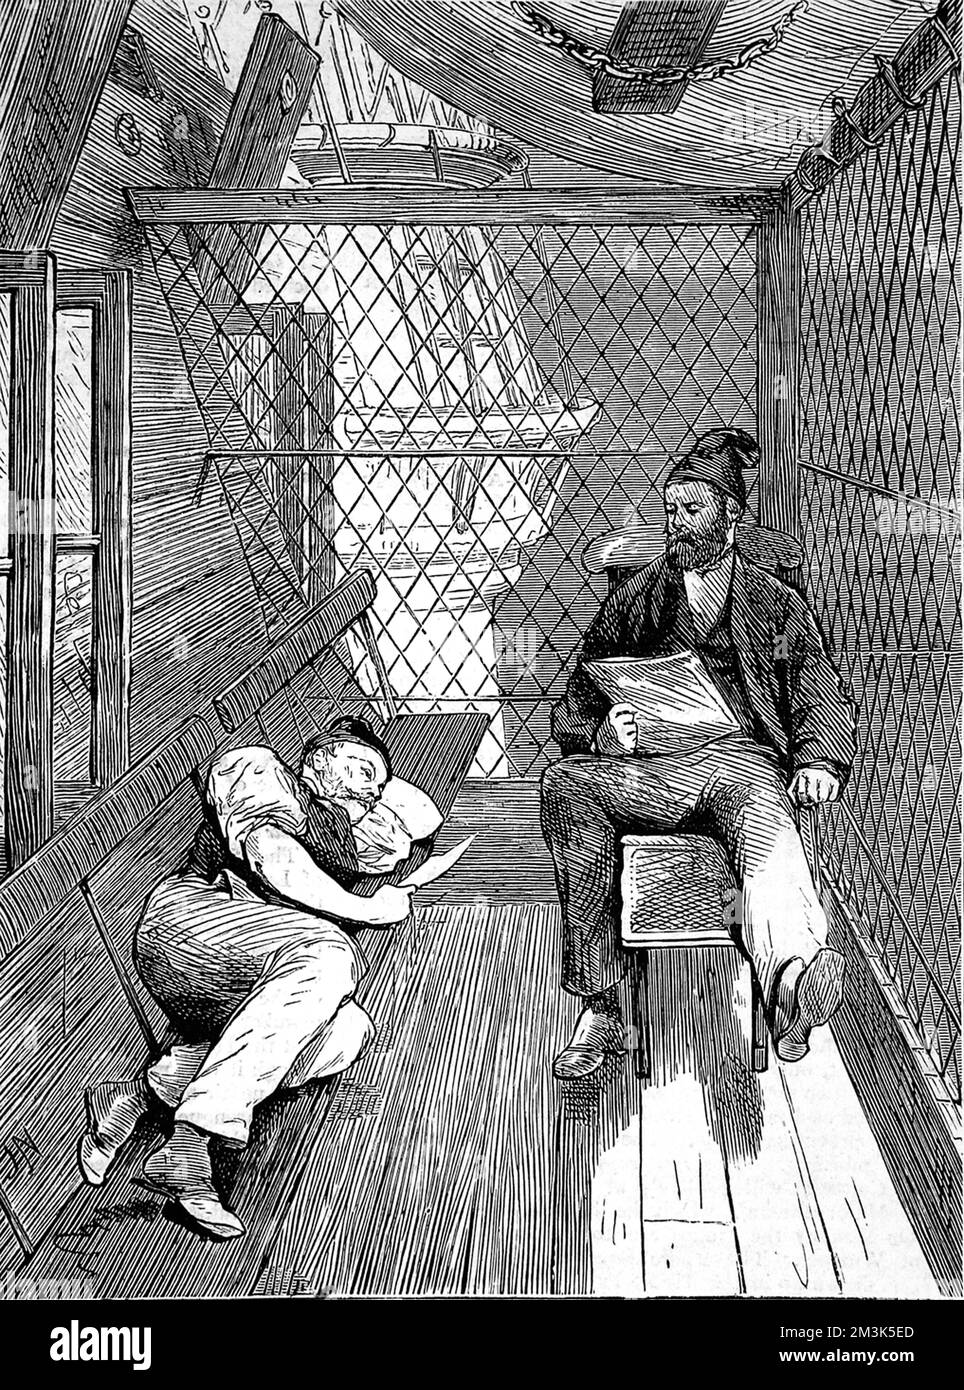 The so-called 'bird cage walk'. On board the hospital ship 'Victor Emmanuel'. Two invalids read while recuperating during the Ashanti expedition. The second Ashanti War fought between,1873-74, was between King Kofi Karikari, ruler of the Ashanti (or Asantehene), and the British. Both were trying to secure the coastal town of Elmina on the West Coast of Africa also known as the Gold Coast.  28 March 1874 Stock Photo